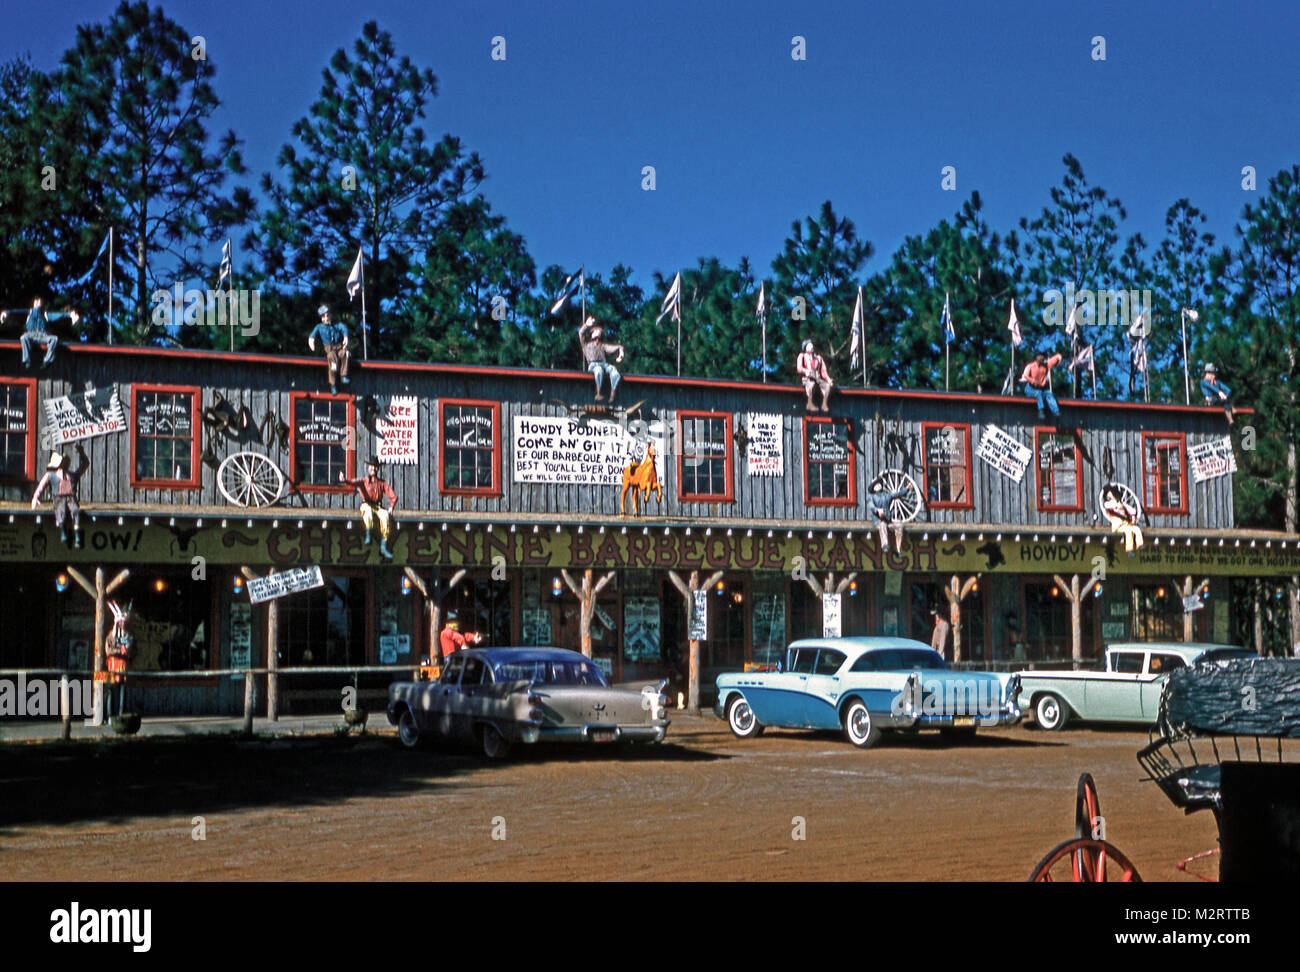 The Cheyenne Barbeque Ranch, an eccentric food restaurant, Florida, c. 1958. The rustic frontage includes mannequins dressed in cowboy clothing, animal horns and hand-wrtten signage with some interesting spelling - eg 'Howdy podner!', 'Come an' git it!' Stock Photo